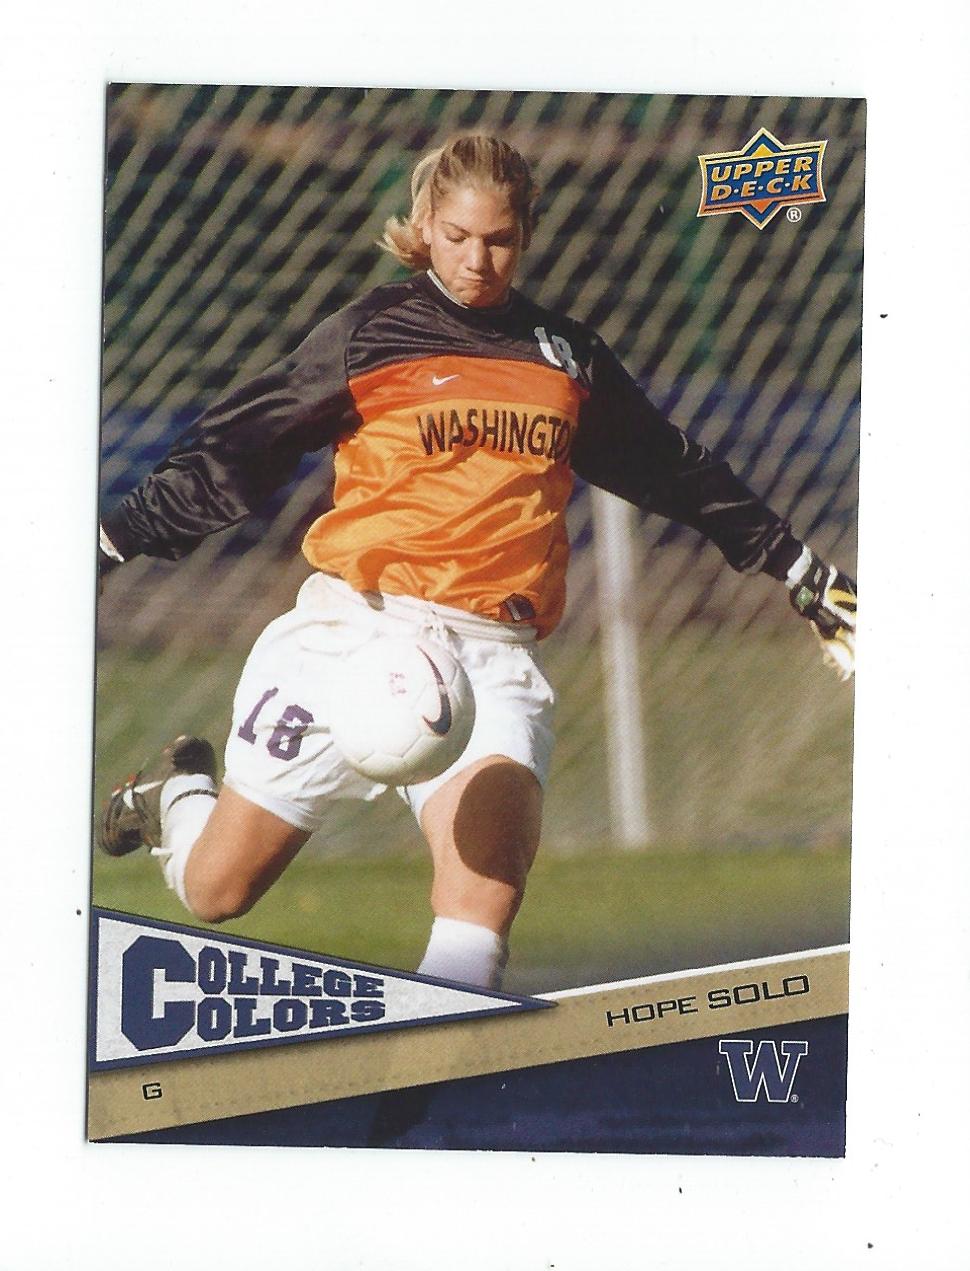 2010-11 Upper Deck College Colors #14 Hope Solo